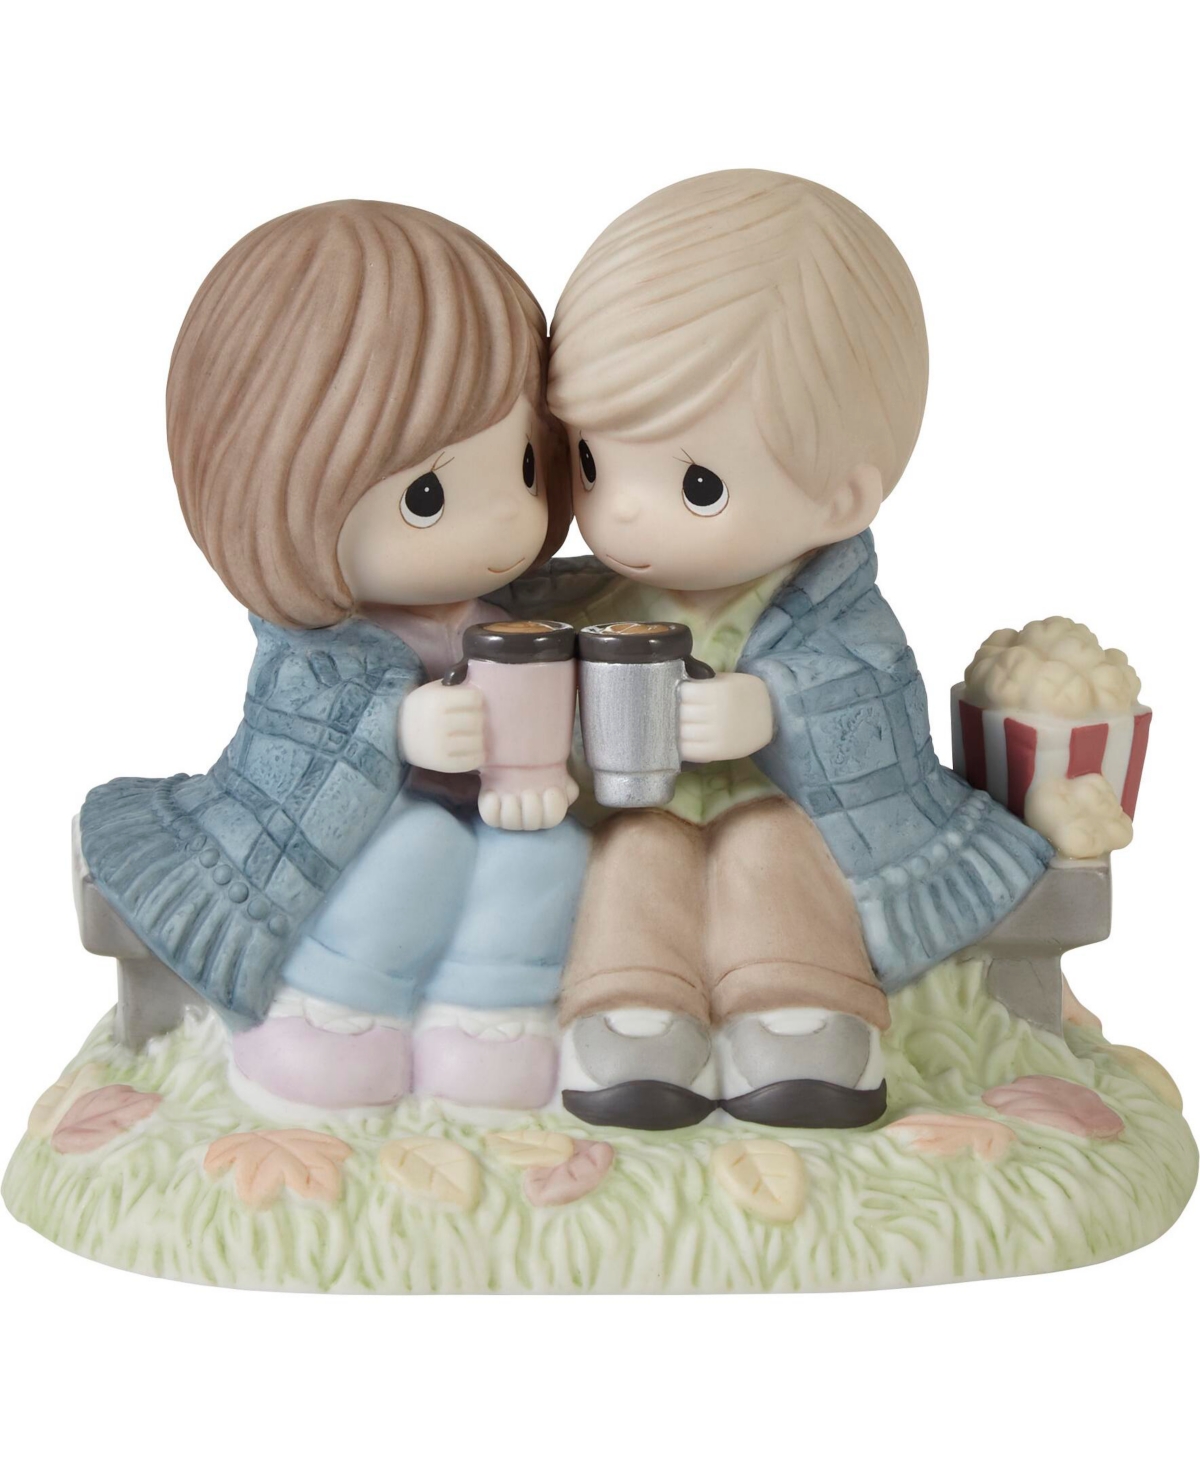 Precious Moments I'm Wrapped In Your Love Bisque Porcelain Figurine In Multicolored